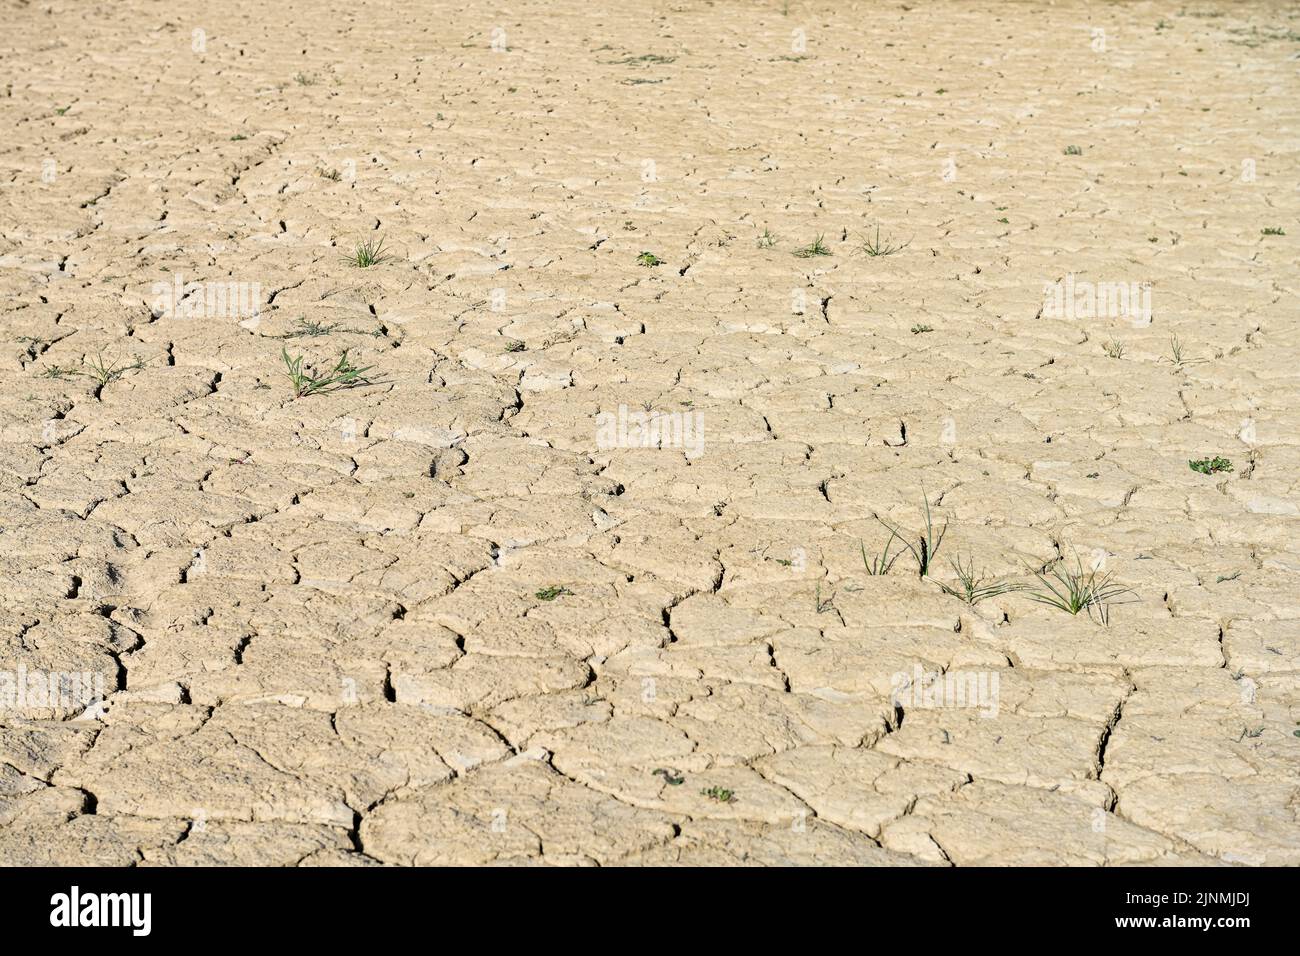 Texture of dry land in southern Europe. Global warming and greenhouse effect Stock Photo